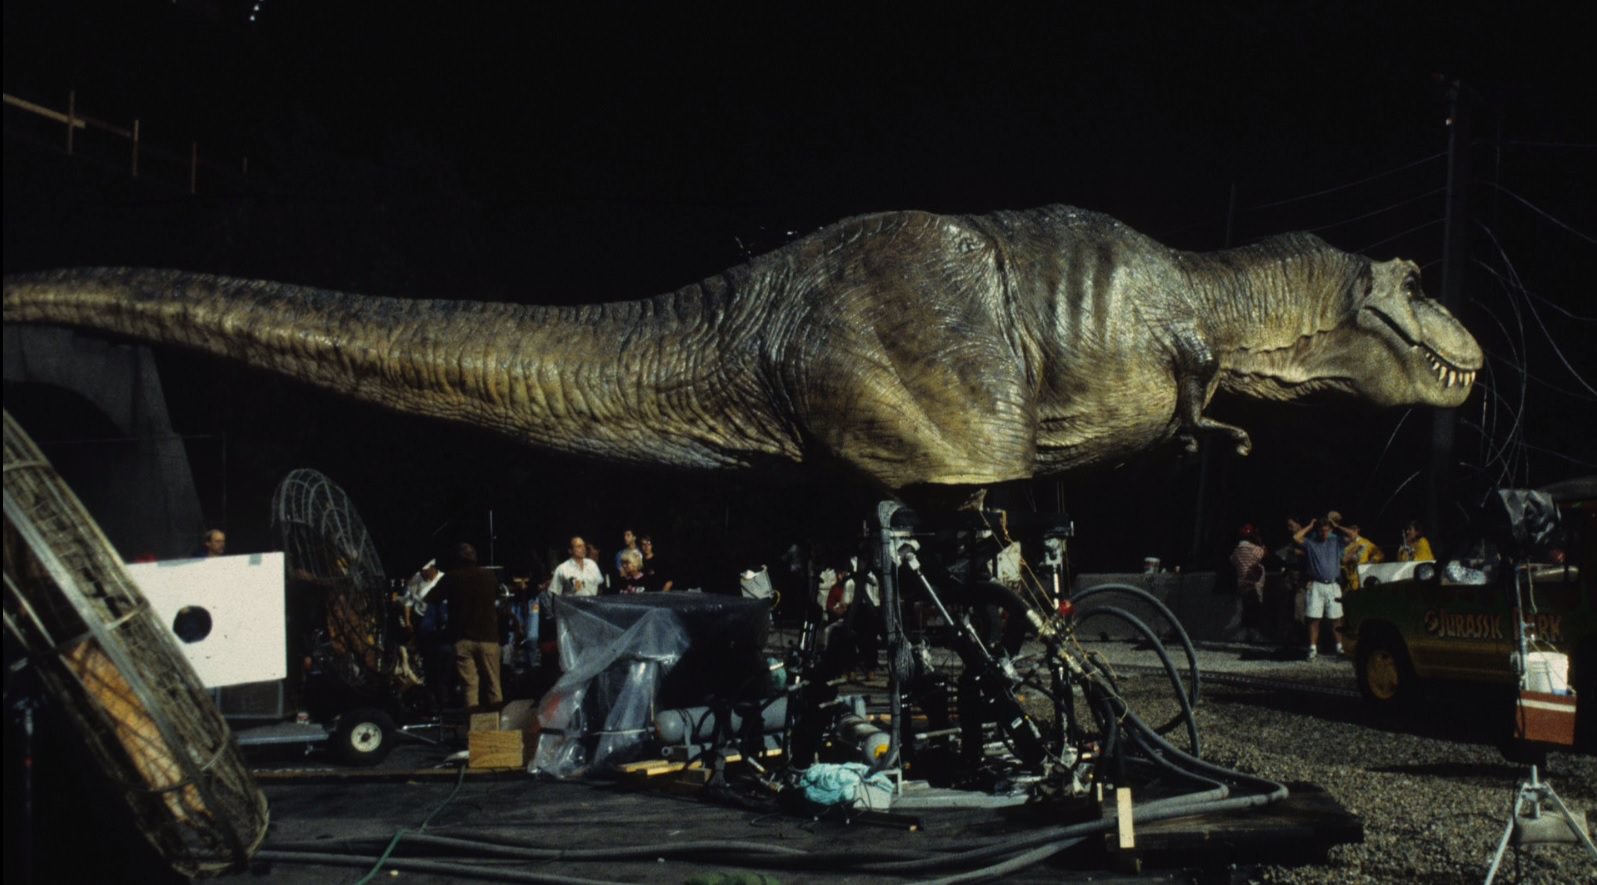 Crew members position the giant animatronic T-Rex for a scene in Jurassic Park (1993).